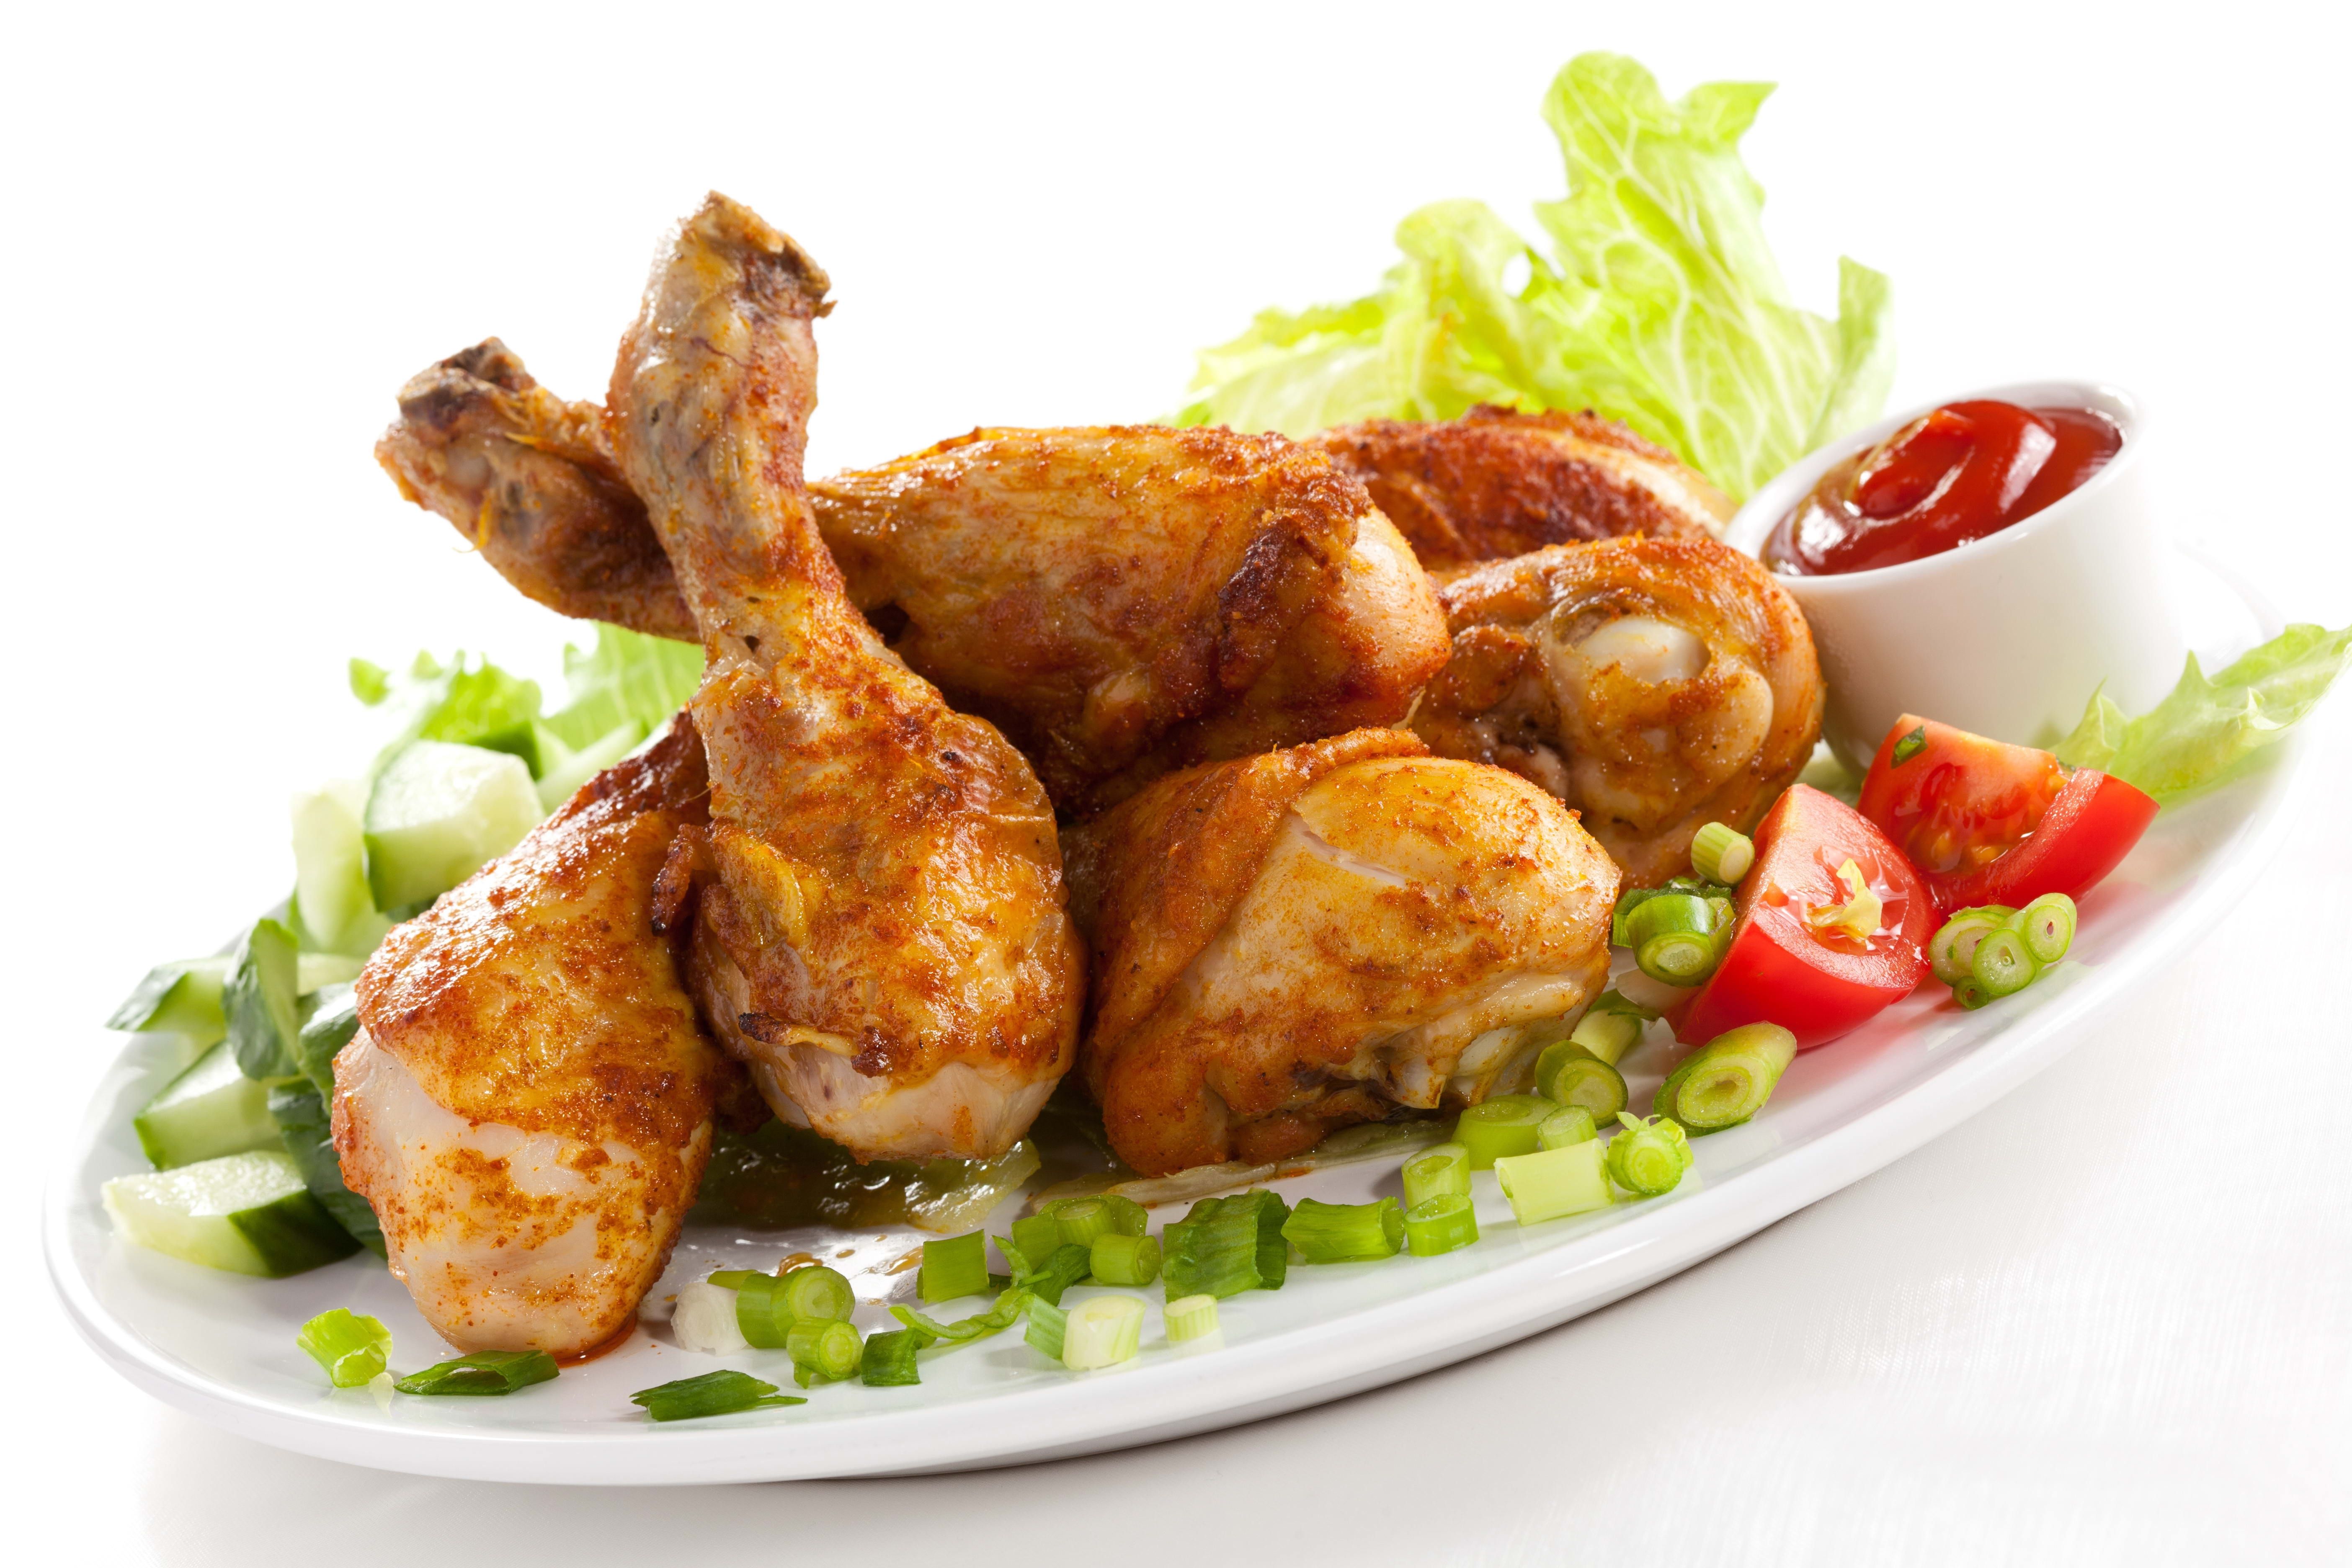 Wallpaper, tomatoes, white background, fish, Onions, fried chicken, lettuce, cuisine, dish, produce, hors d oeuvre, fried food, chicken legs, garnish, chicken meat, tandoori chicken 5616x3744